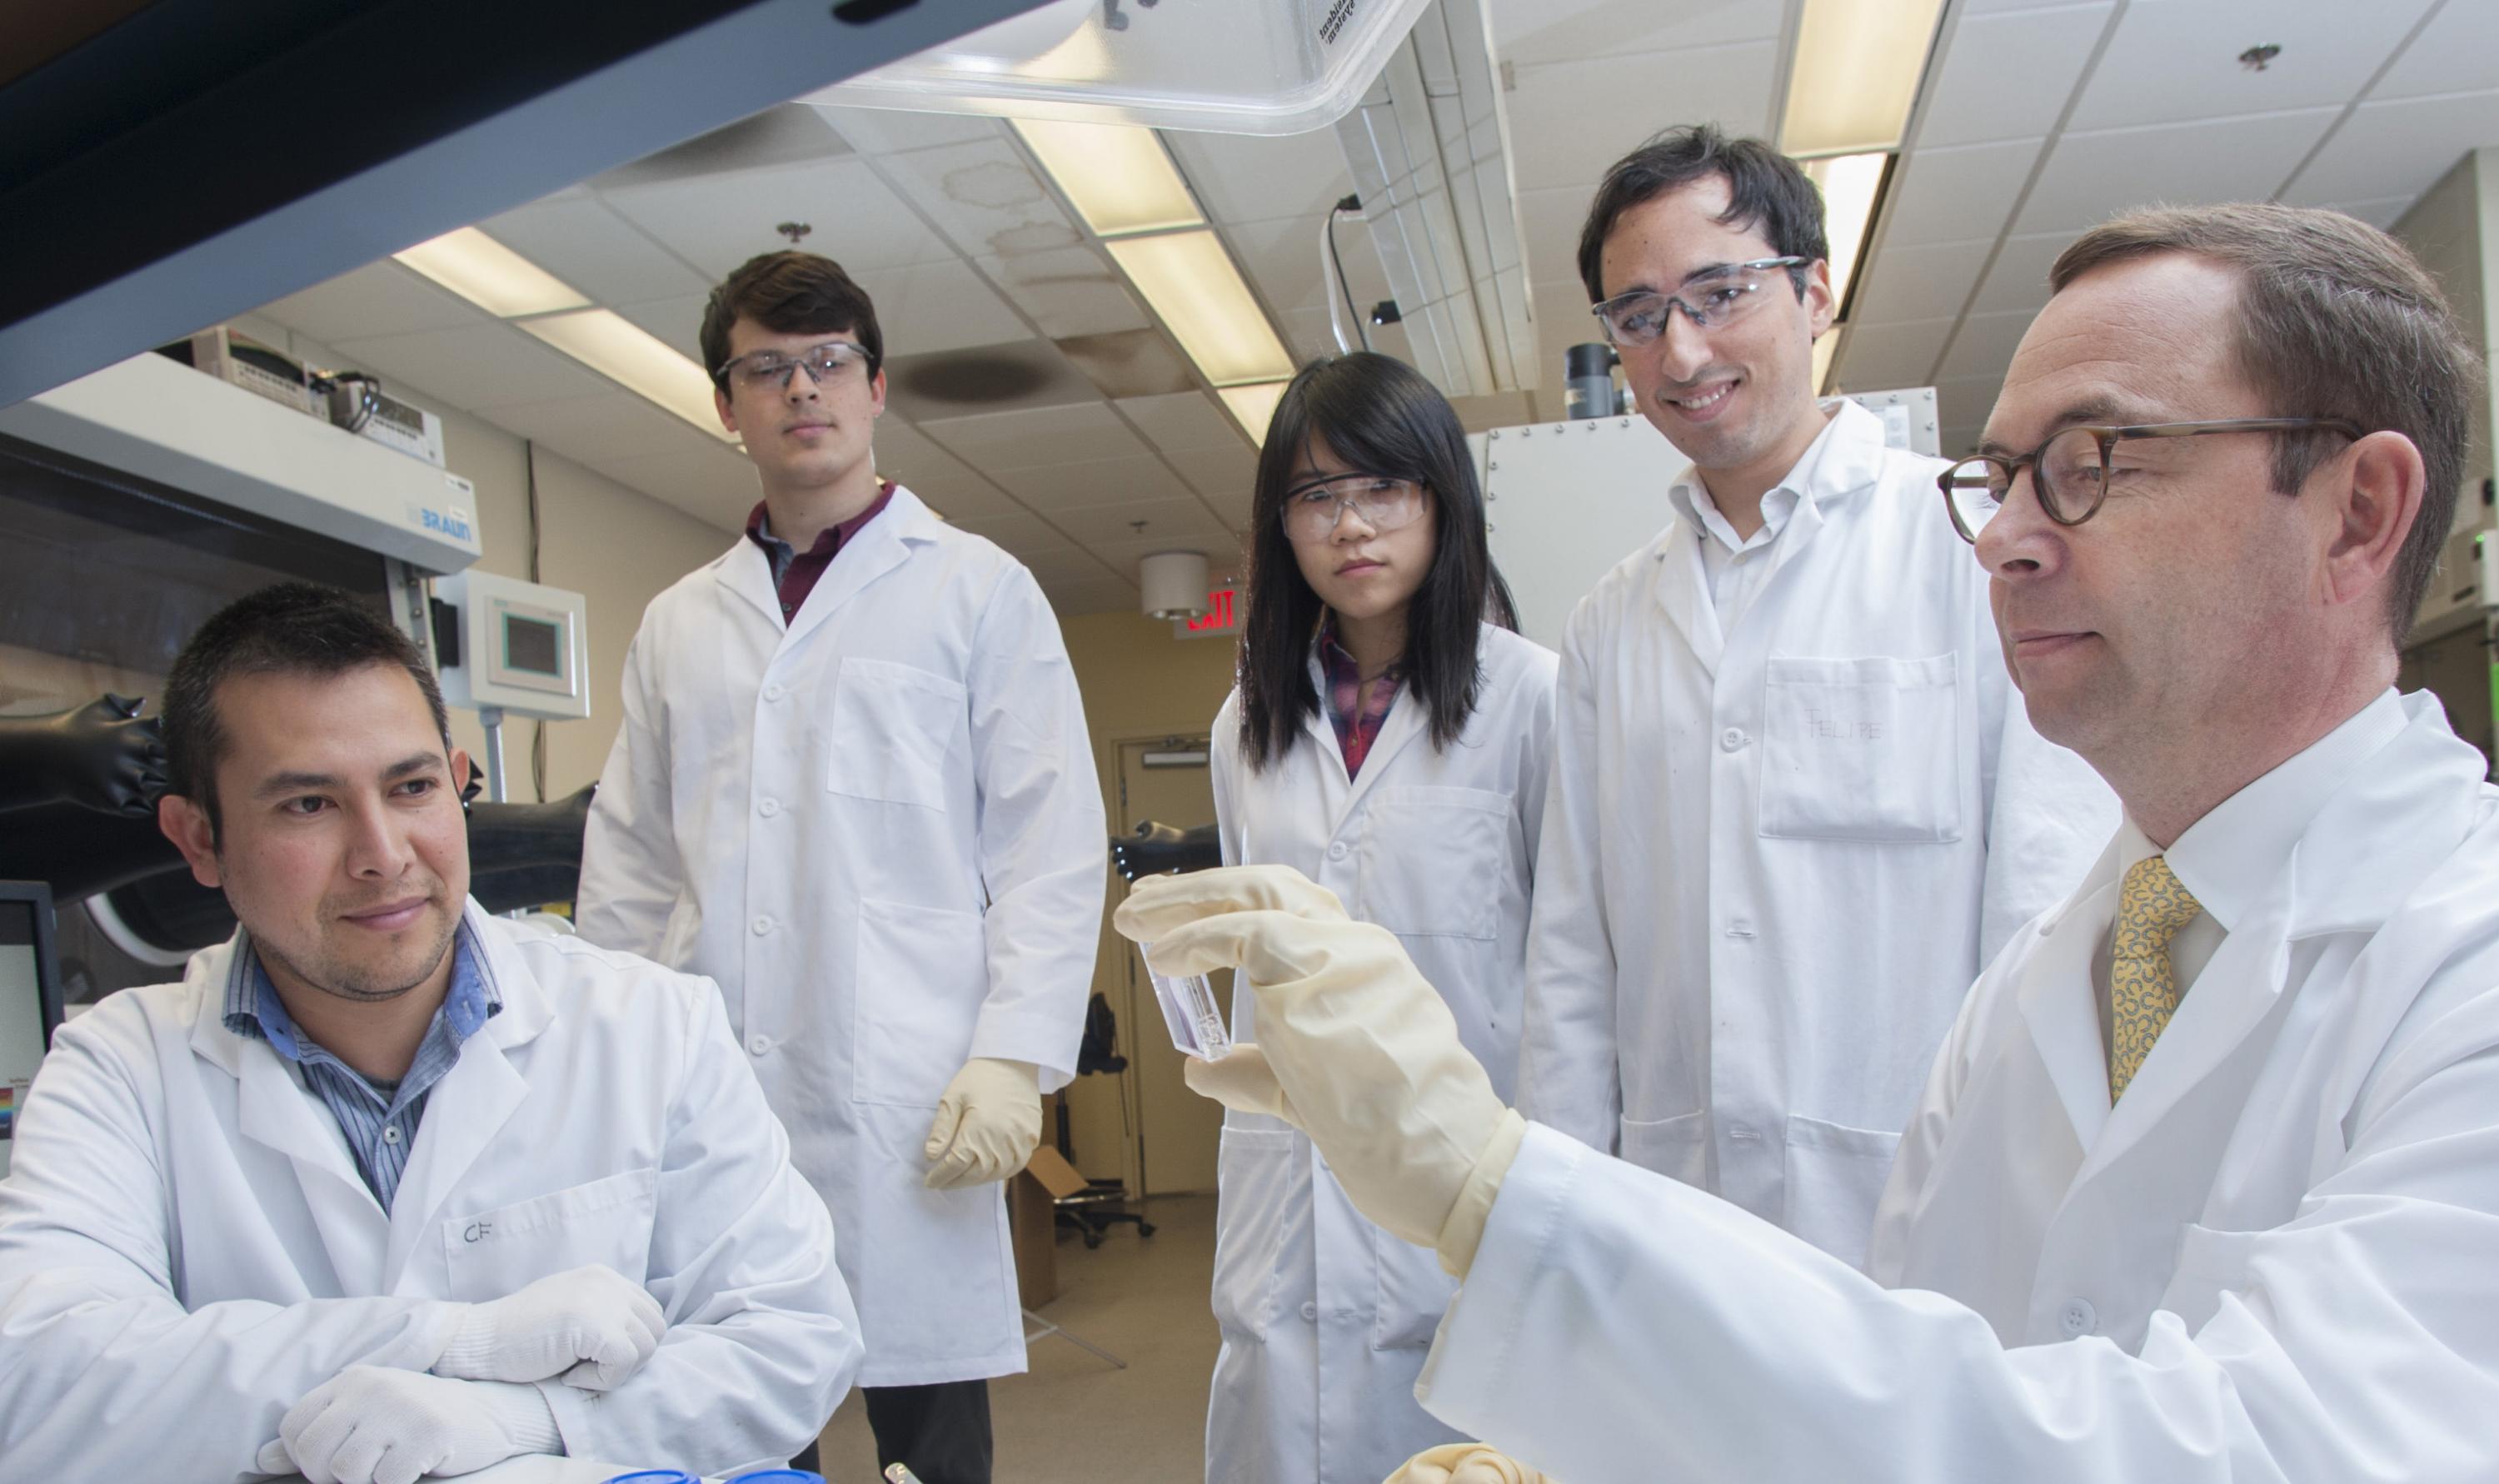 The leading team of scientists at Georgia Tech that developed the new solution-based electrical doping technique for organic semiconductors. Shown are (l-r) senior research scientist Canek Fuentes-Hernandez; graduate students Vladimir Kolesov, Wen-Fang Chou, Felipe Larrain; and professor Bernard Kippelen.  (Credit: Christopher Moore, Georgia Tech)